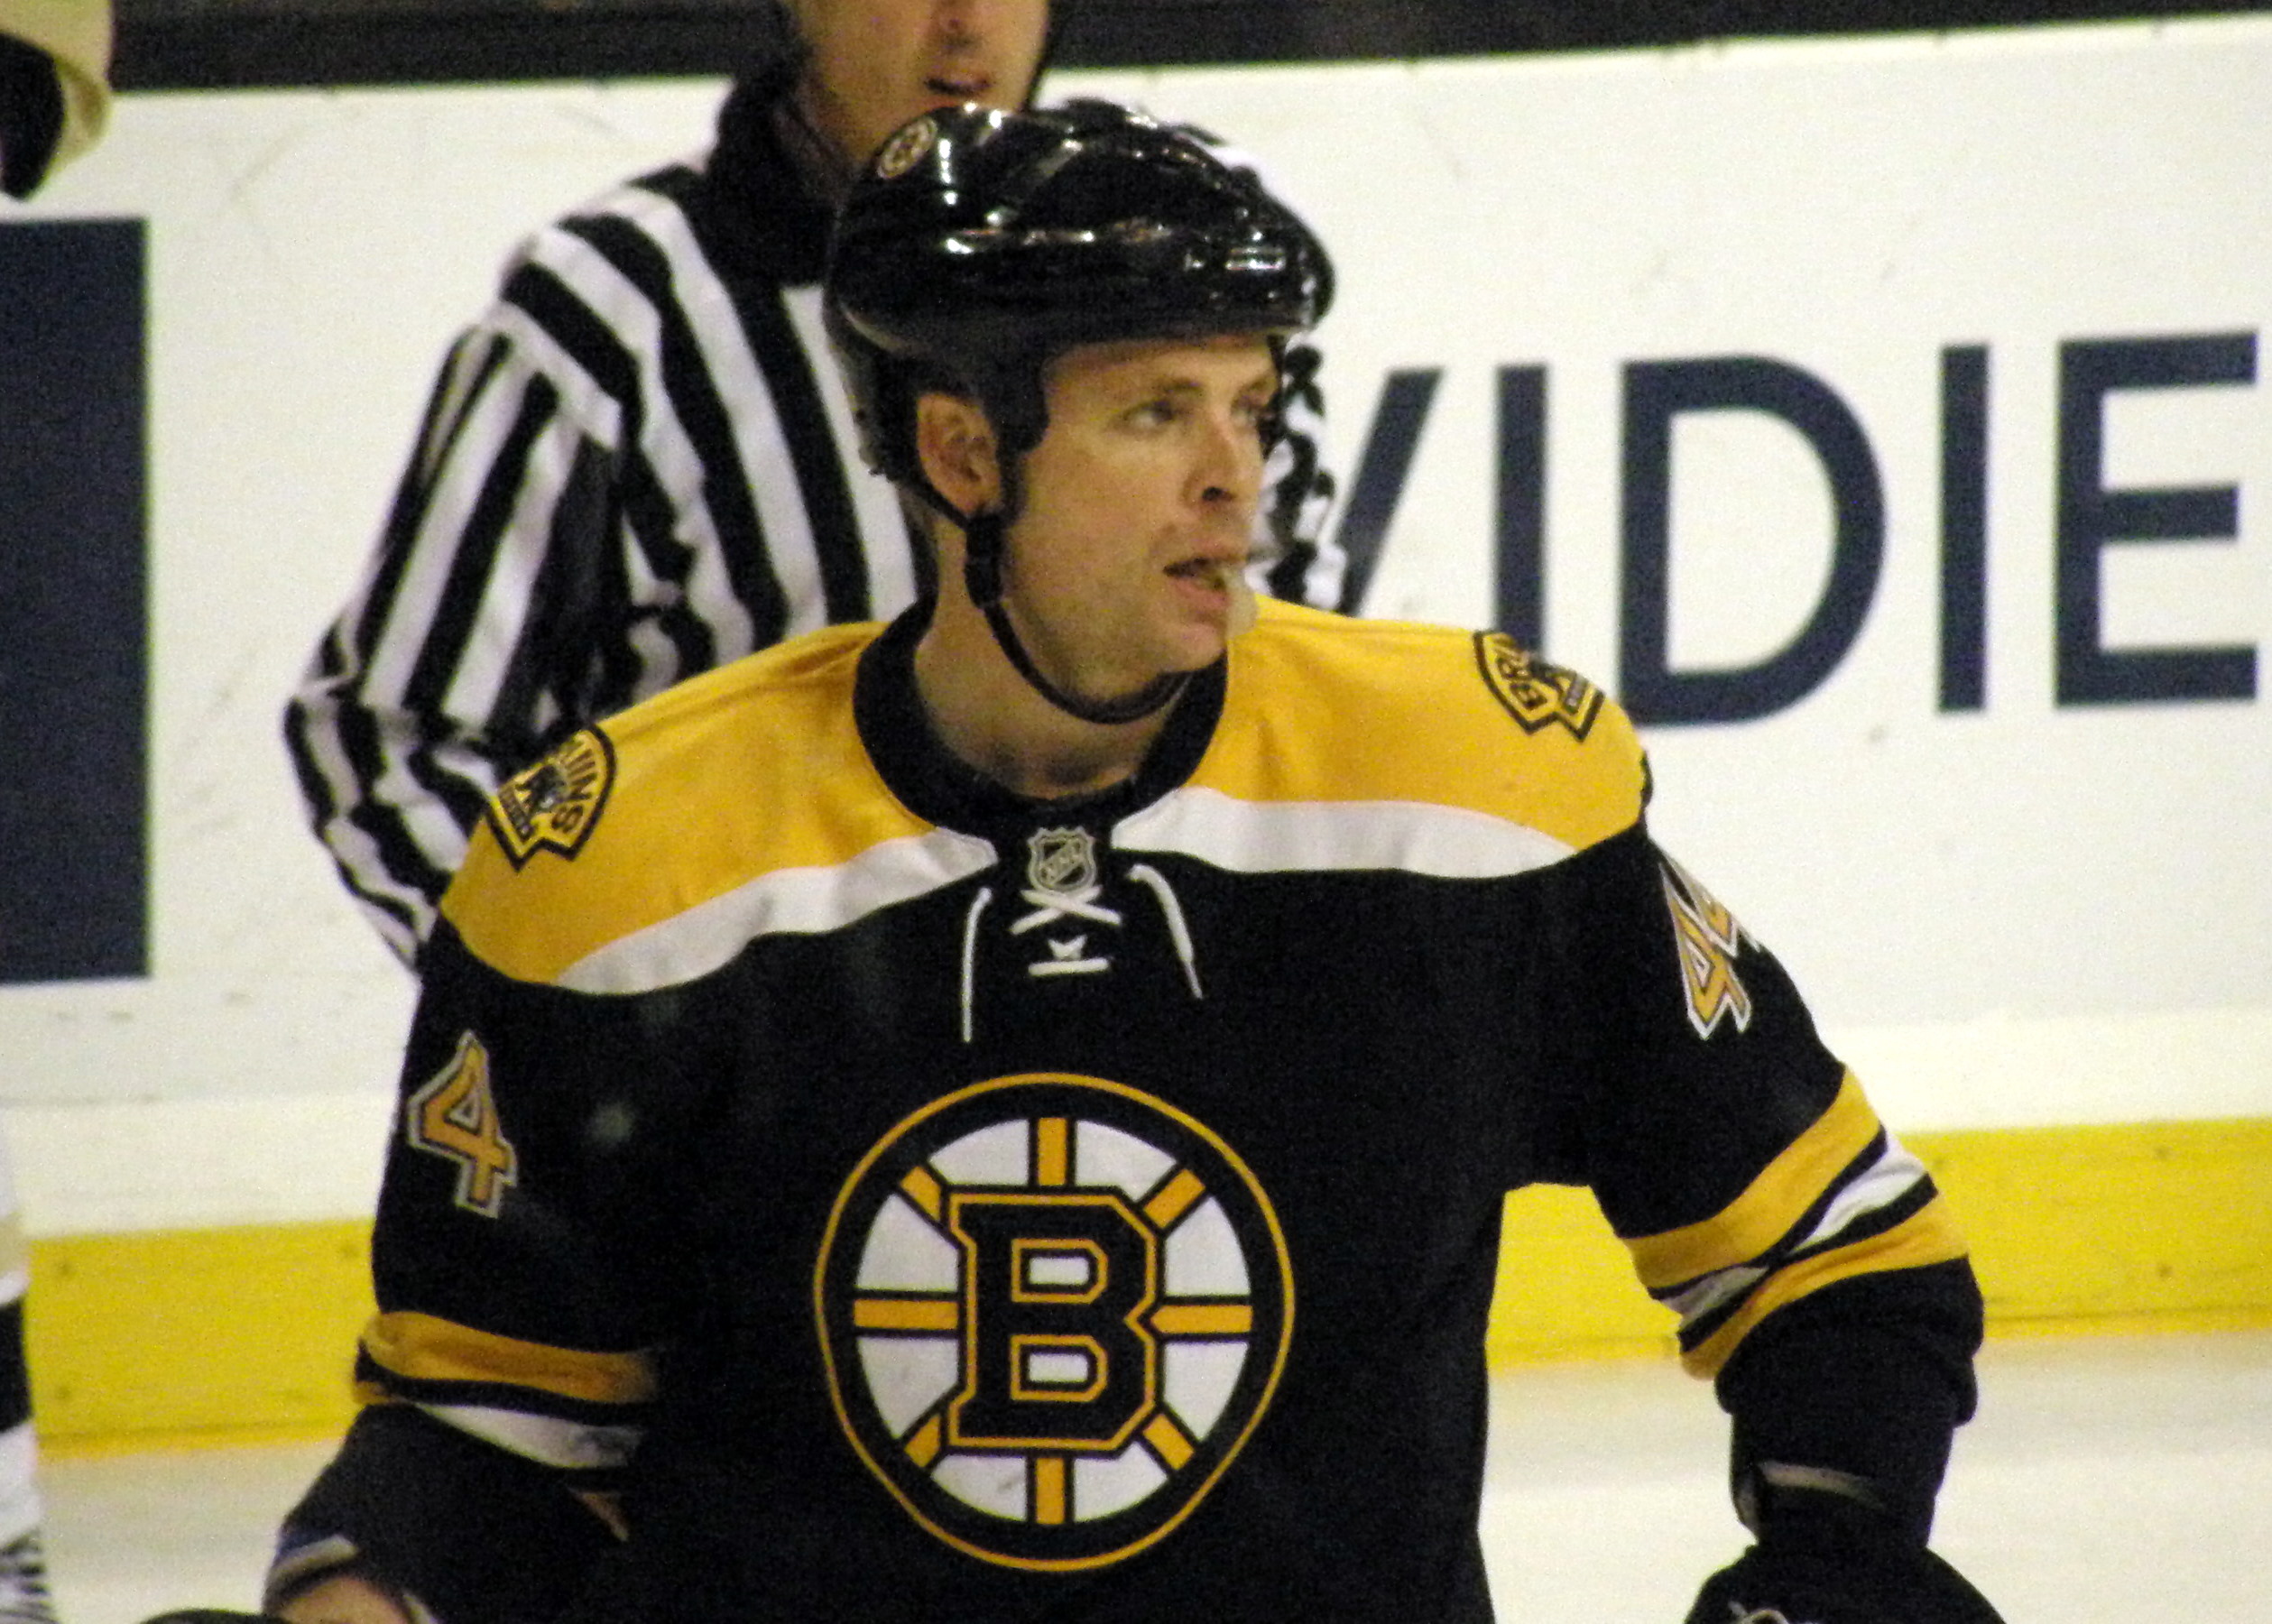 Aaron Ward, Canadian ice hockey player and sportscaster was born on January 17, 1973.